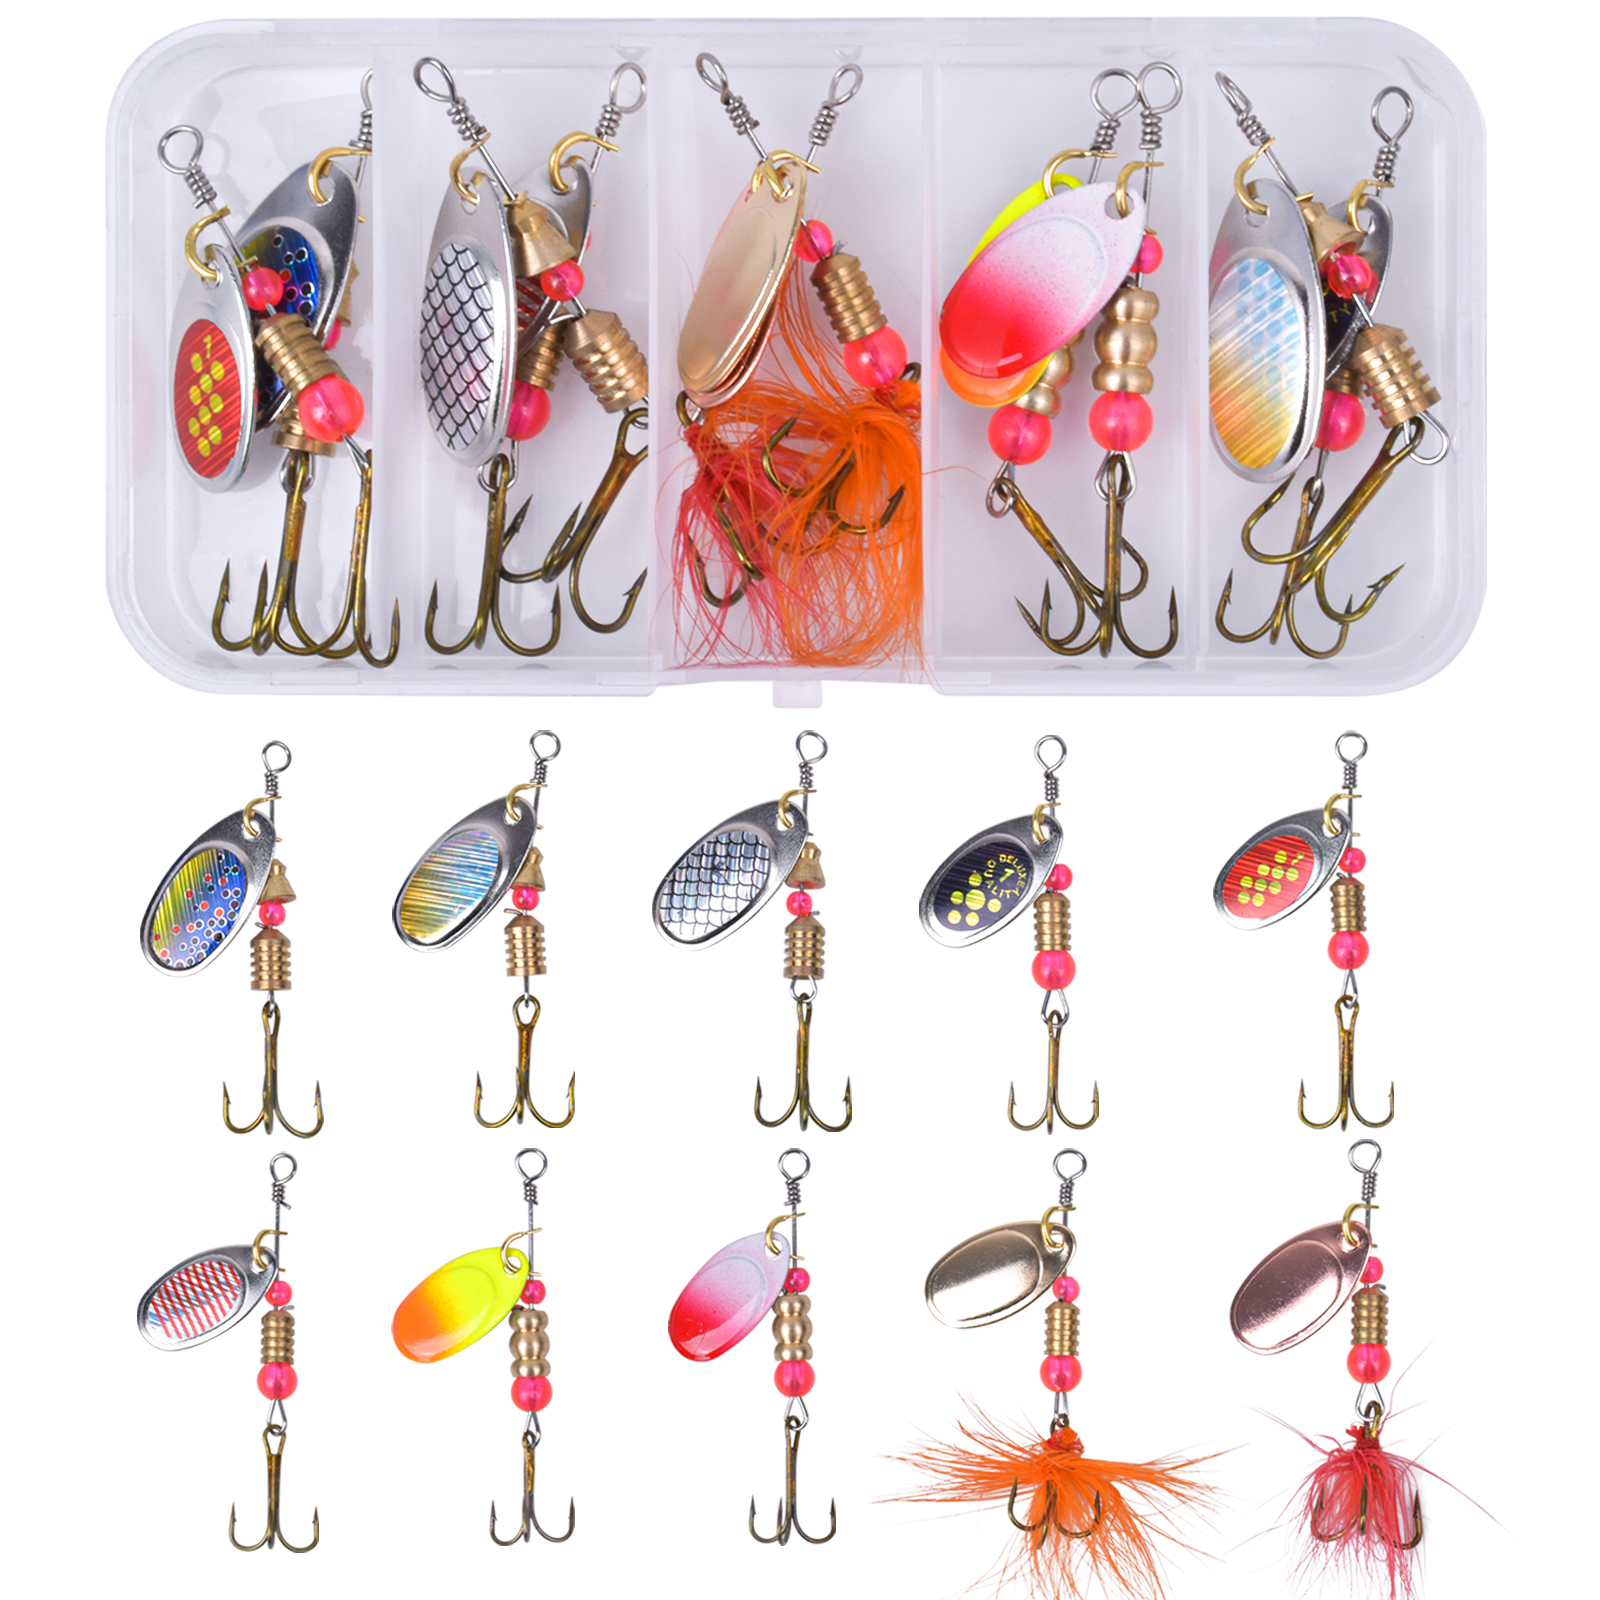 10pcs Metal Fishing Lures Kit For Trout, Pike, Perch, Bass and Salmon